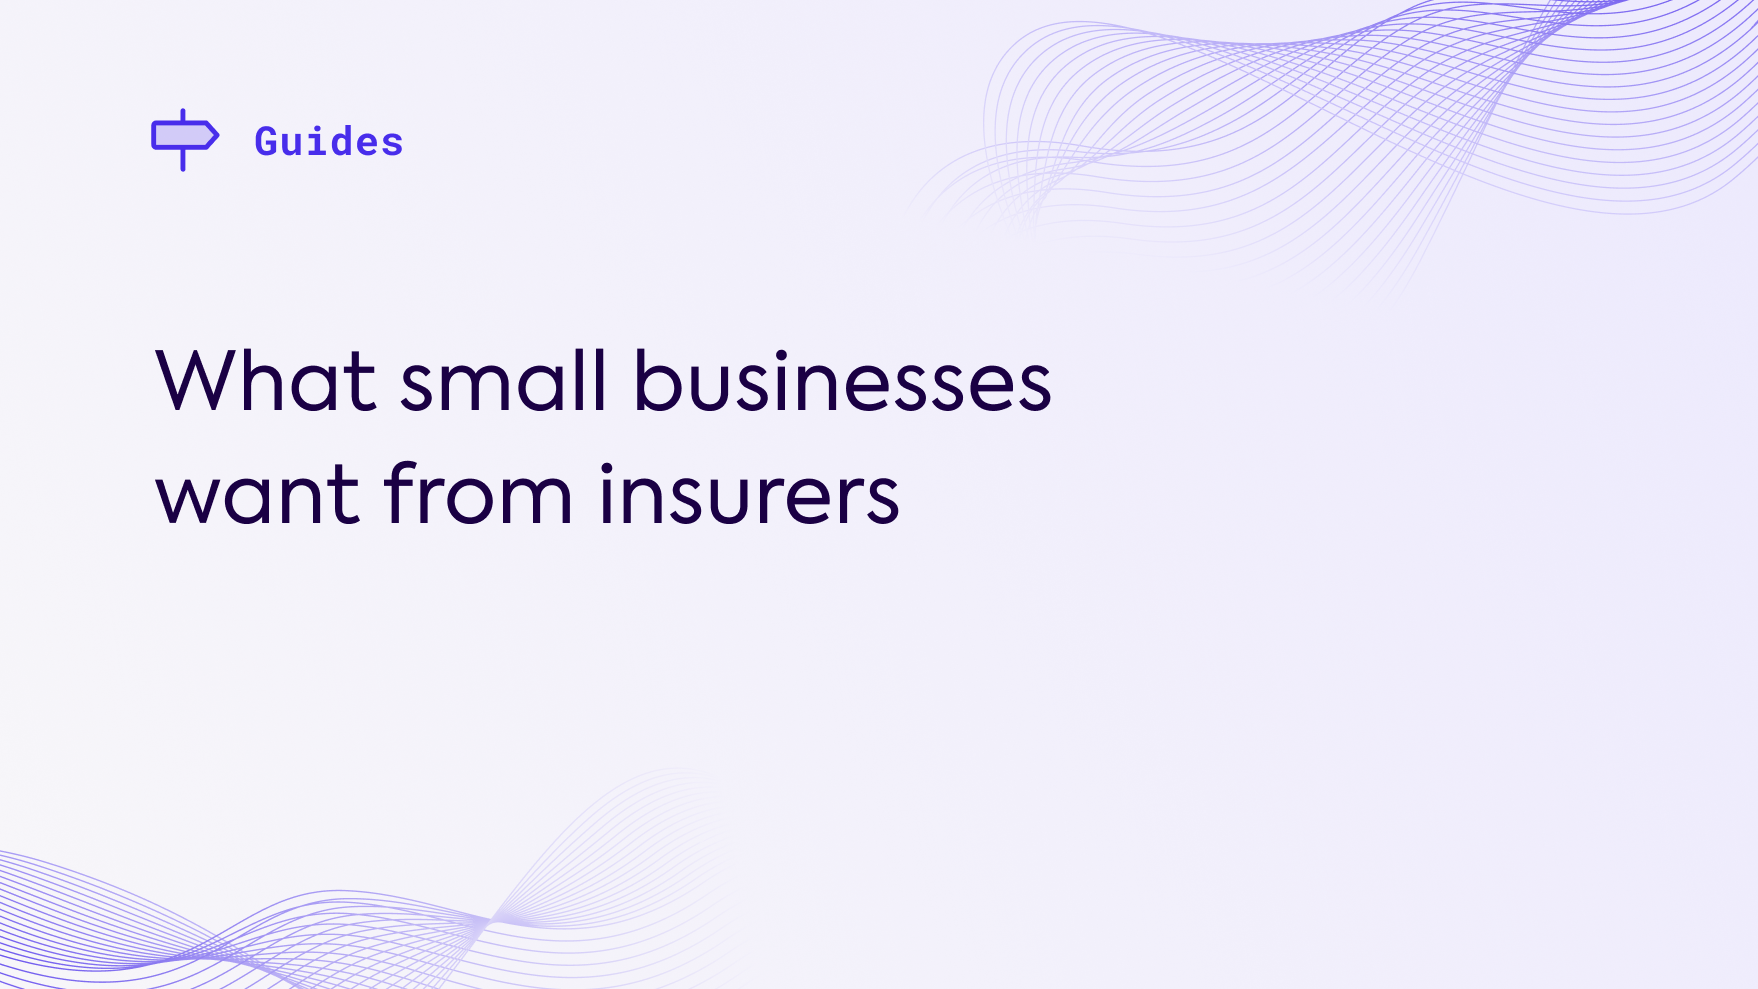 What small businesses want from insurers